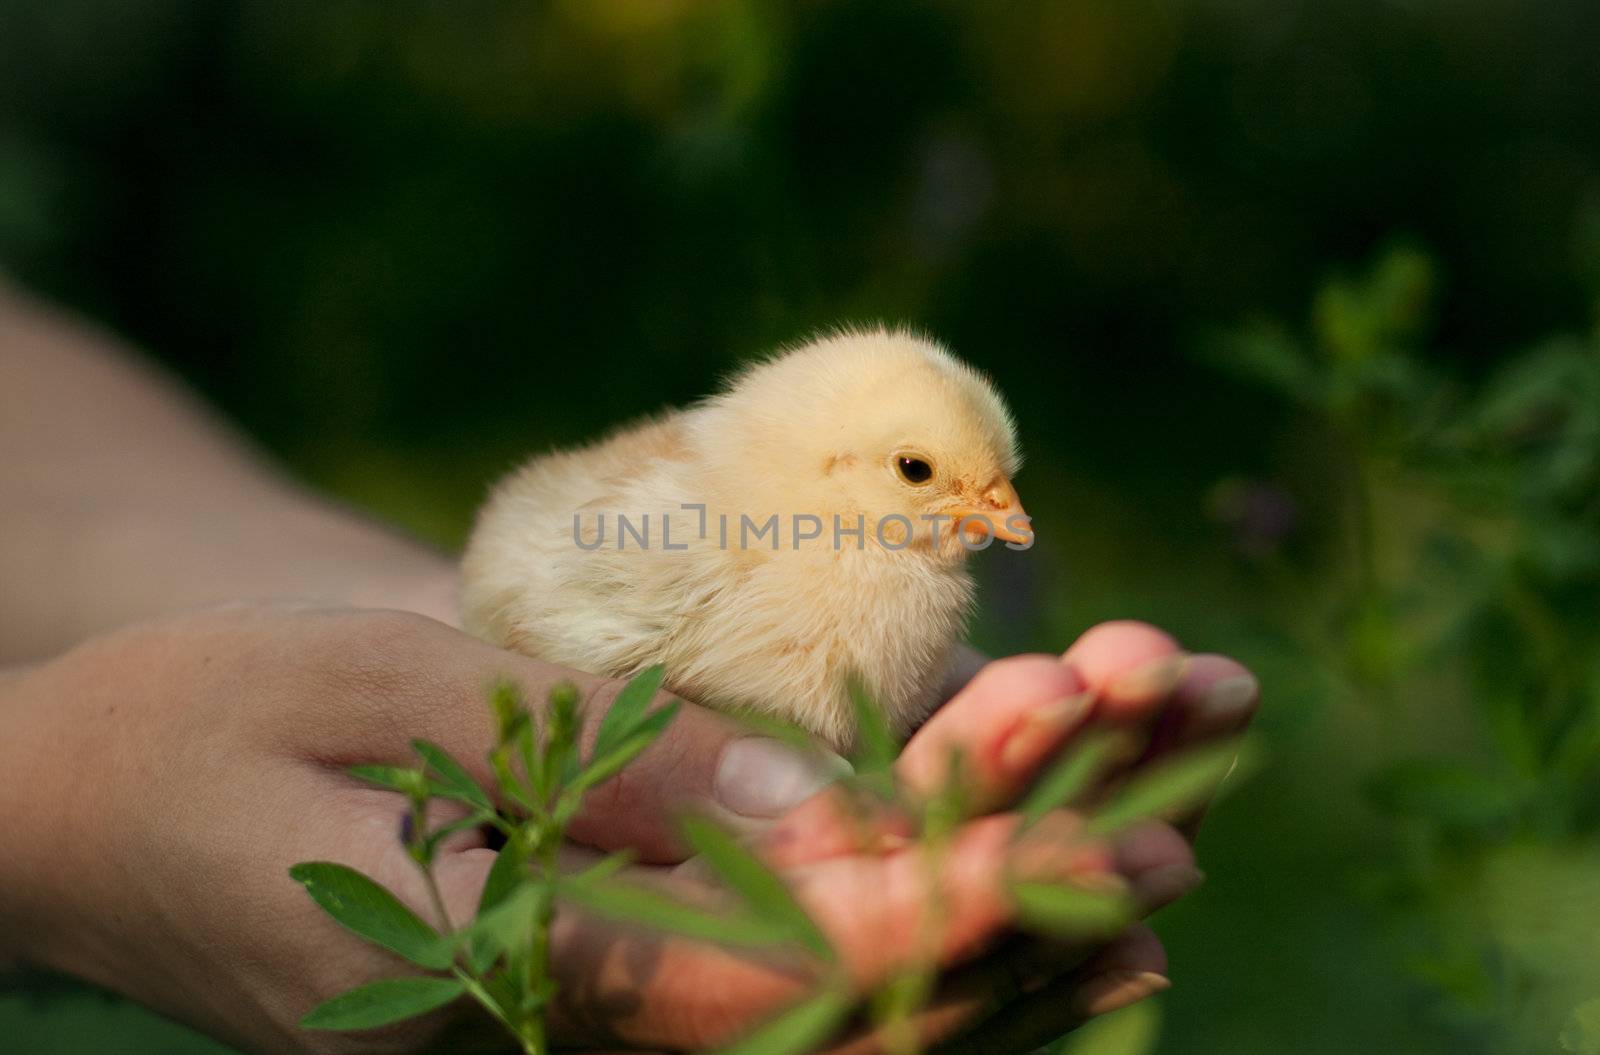 chicken in his hand by zokov